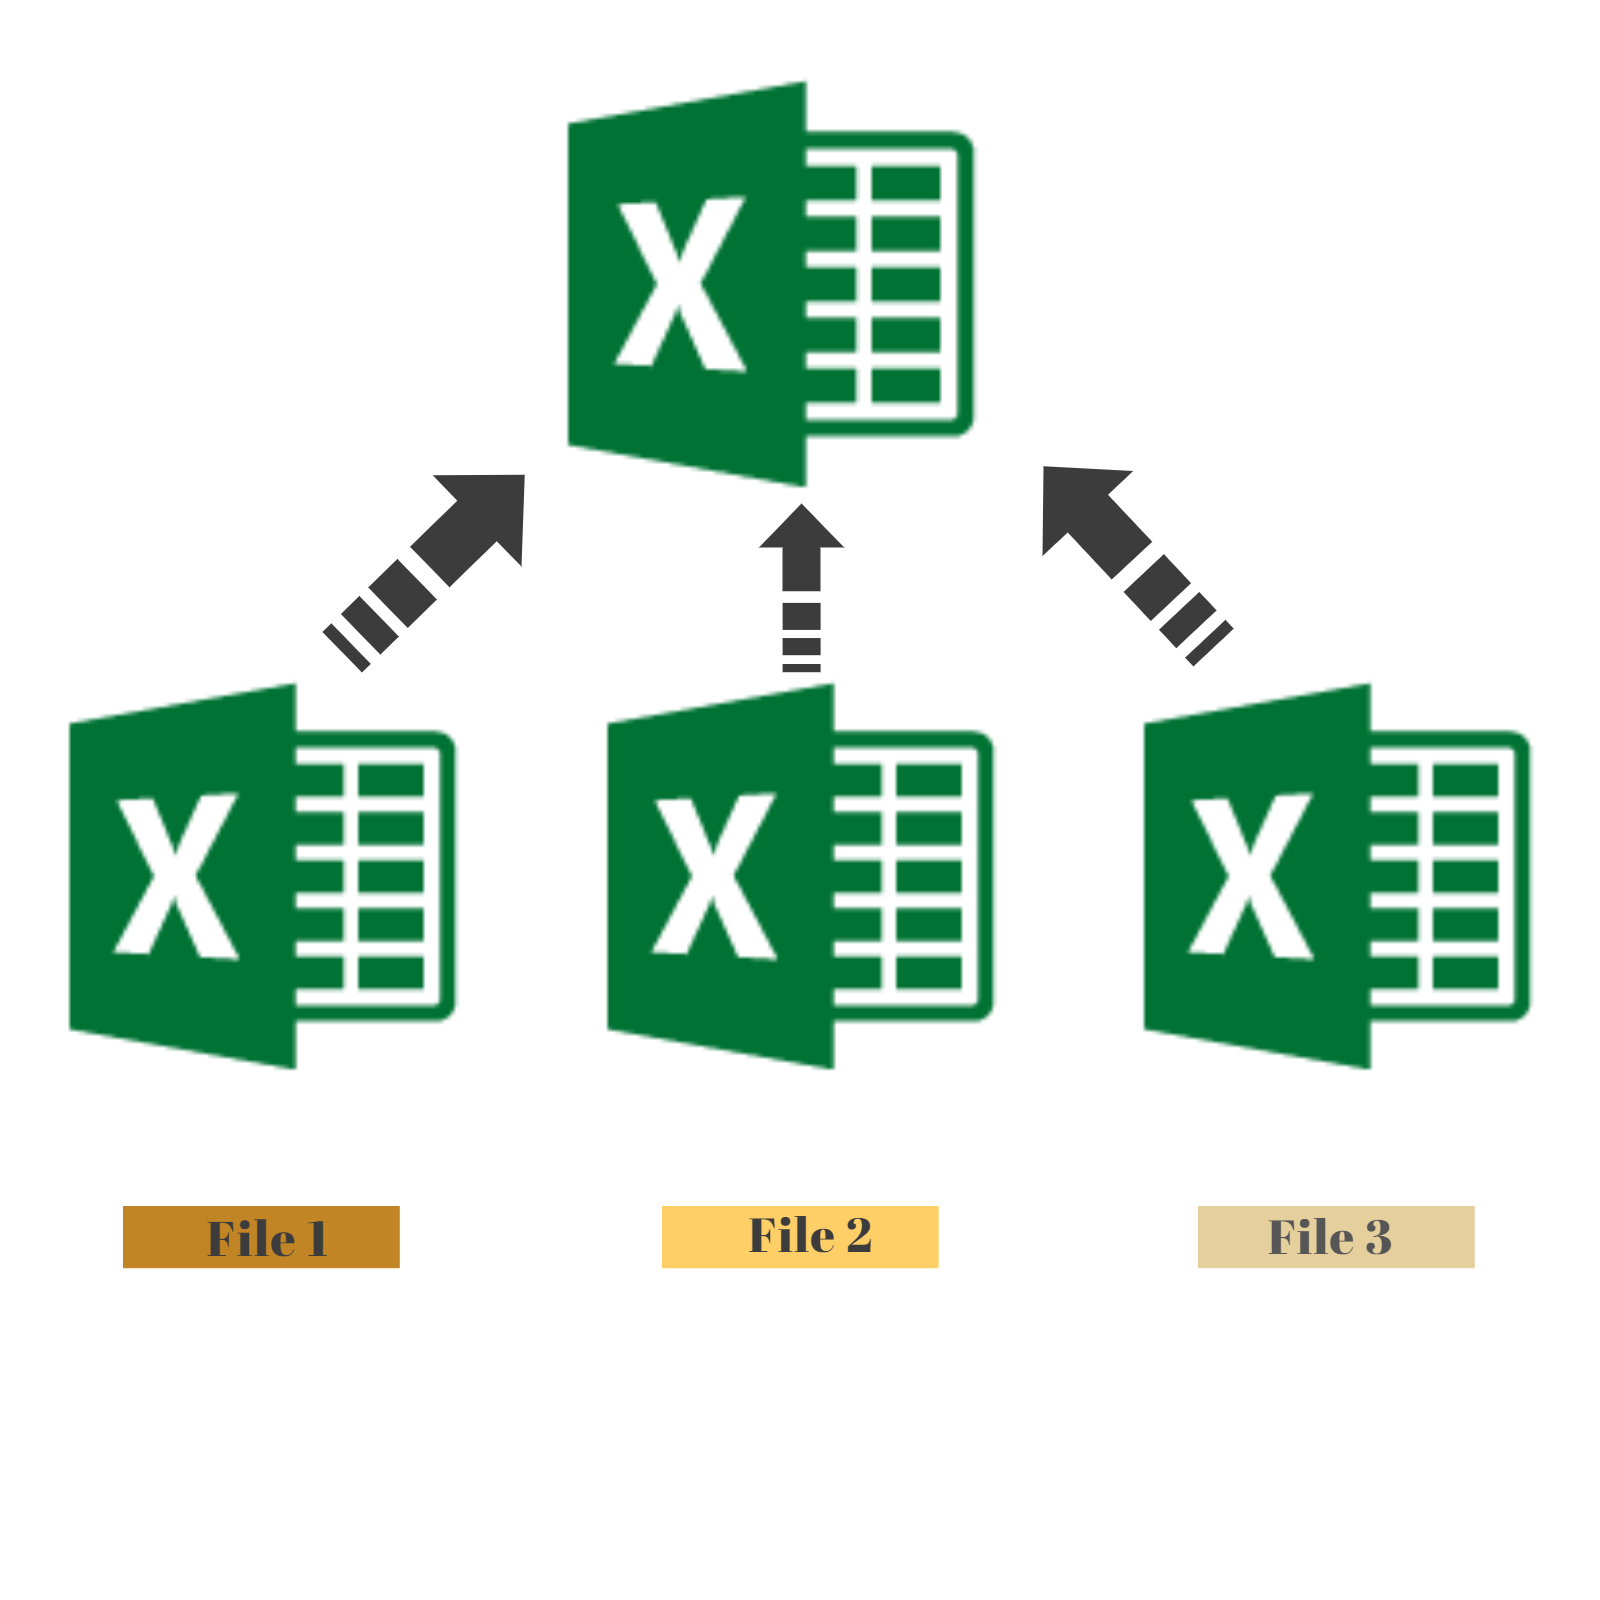 How to combine png files into one. Merge multiple excel intoe